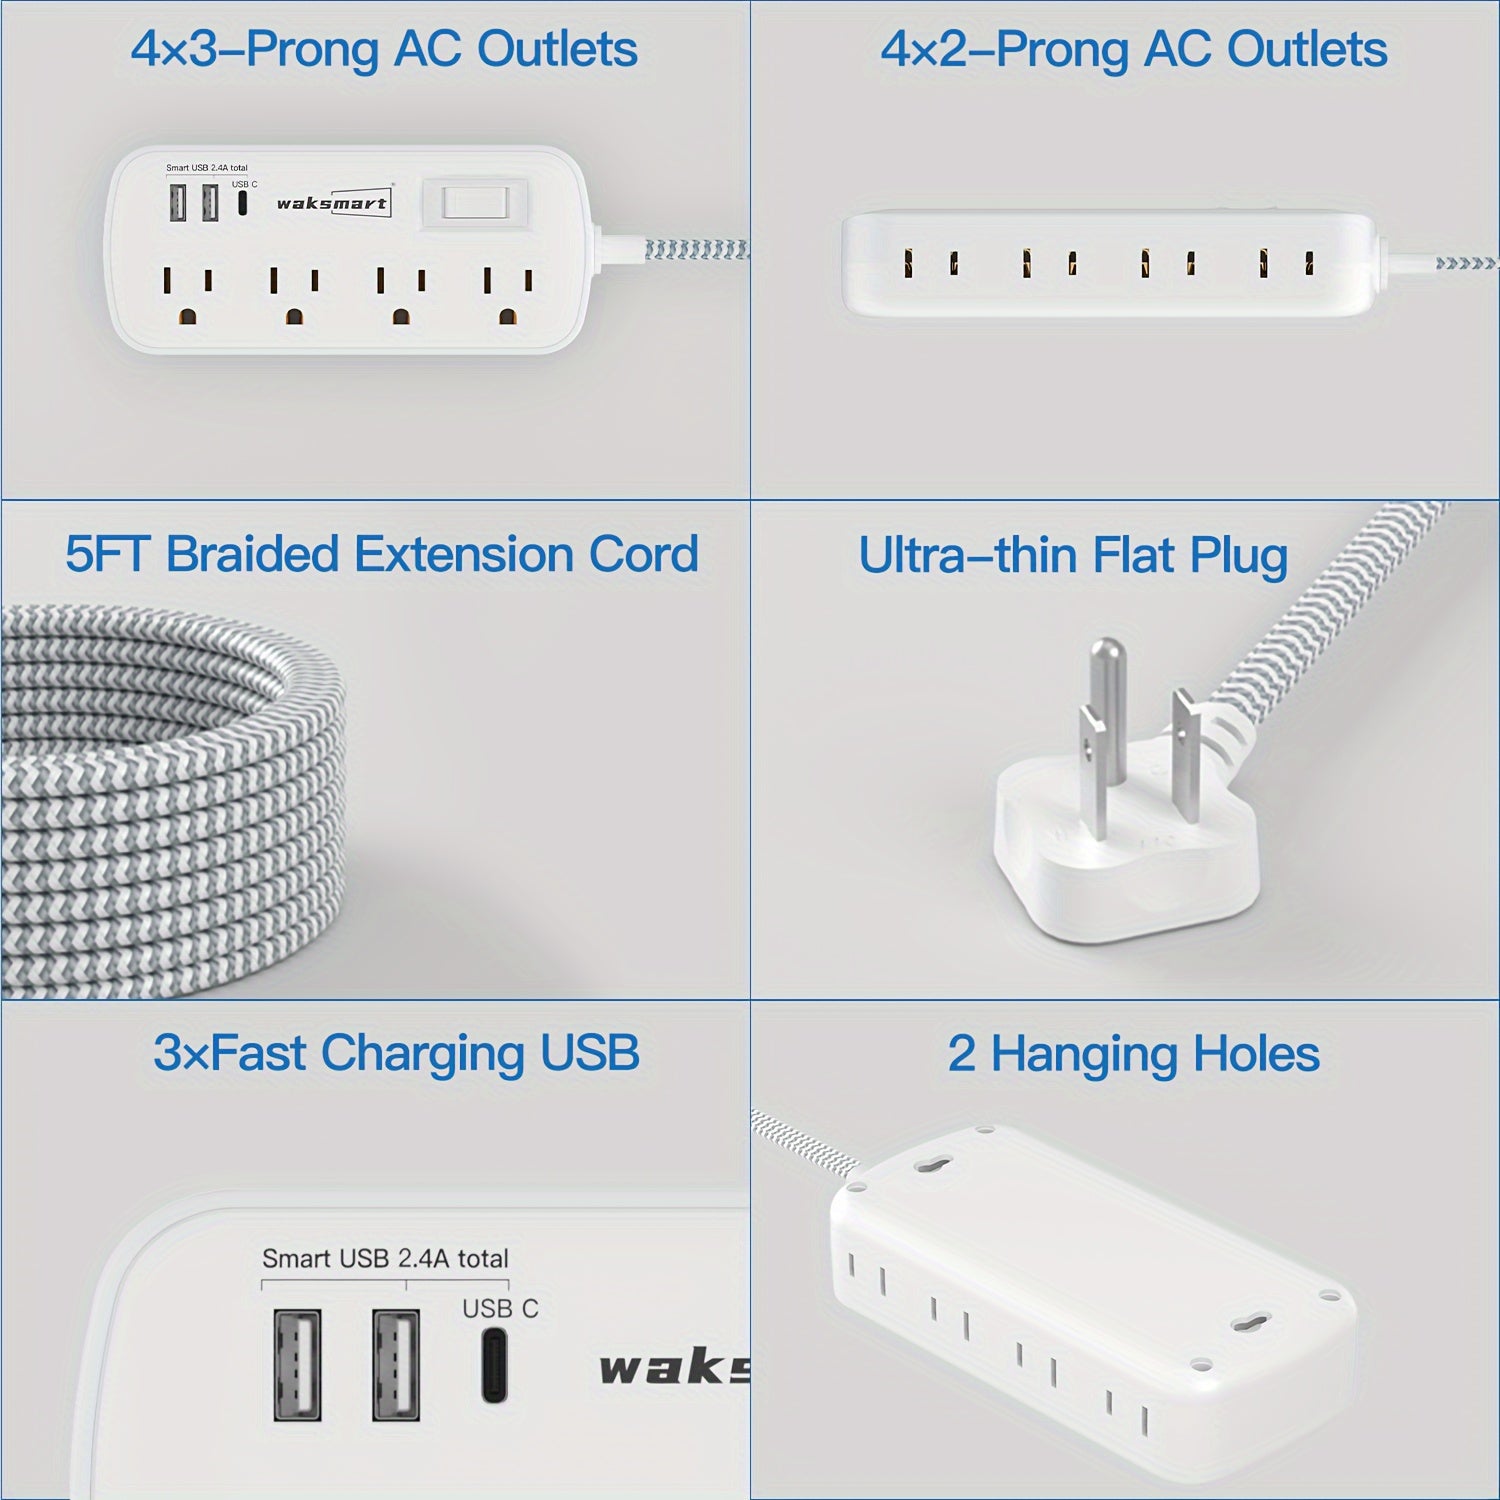 image6 of Temu.com's 8-Outlet Surge Protector with USB-C: A sleek, wall-mountable surge protector with 8 outlets and a USB-C port, ideal for offices and dorm rooms.